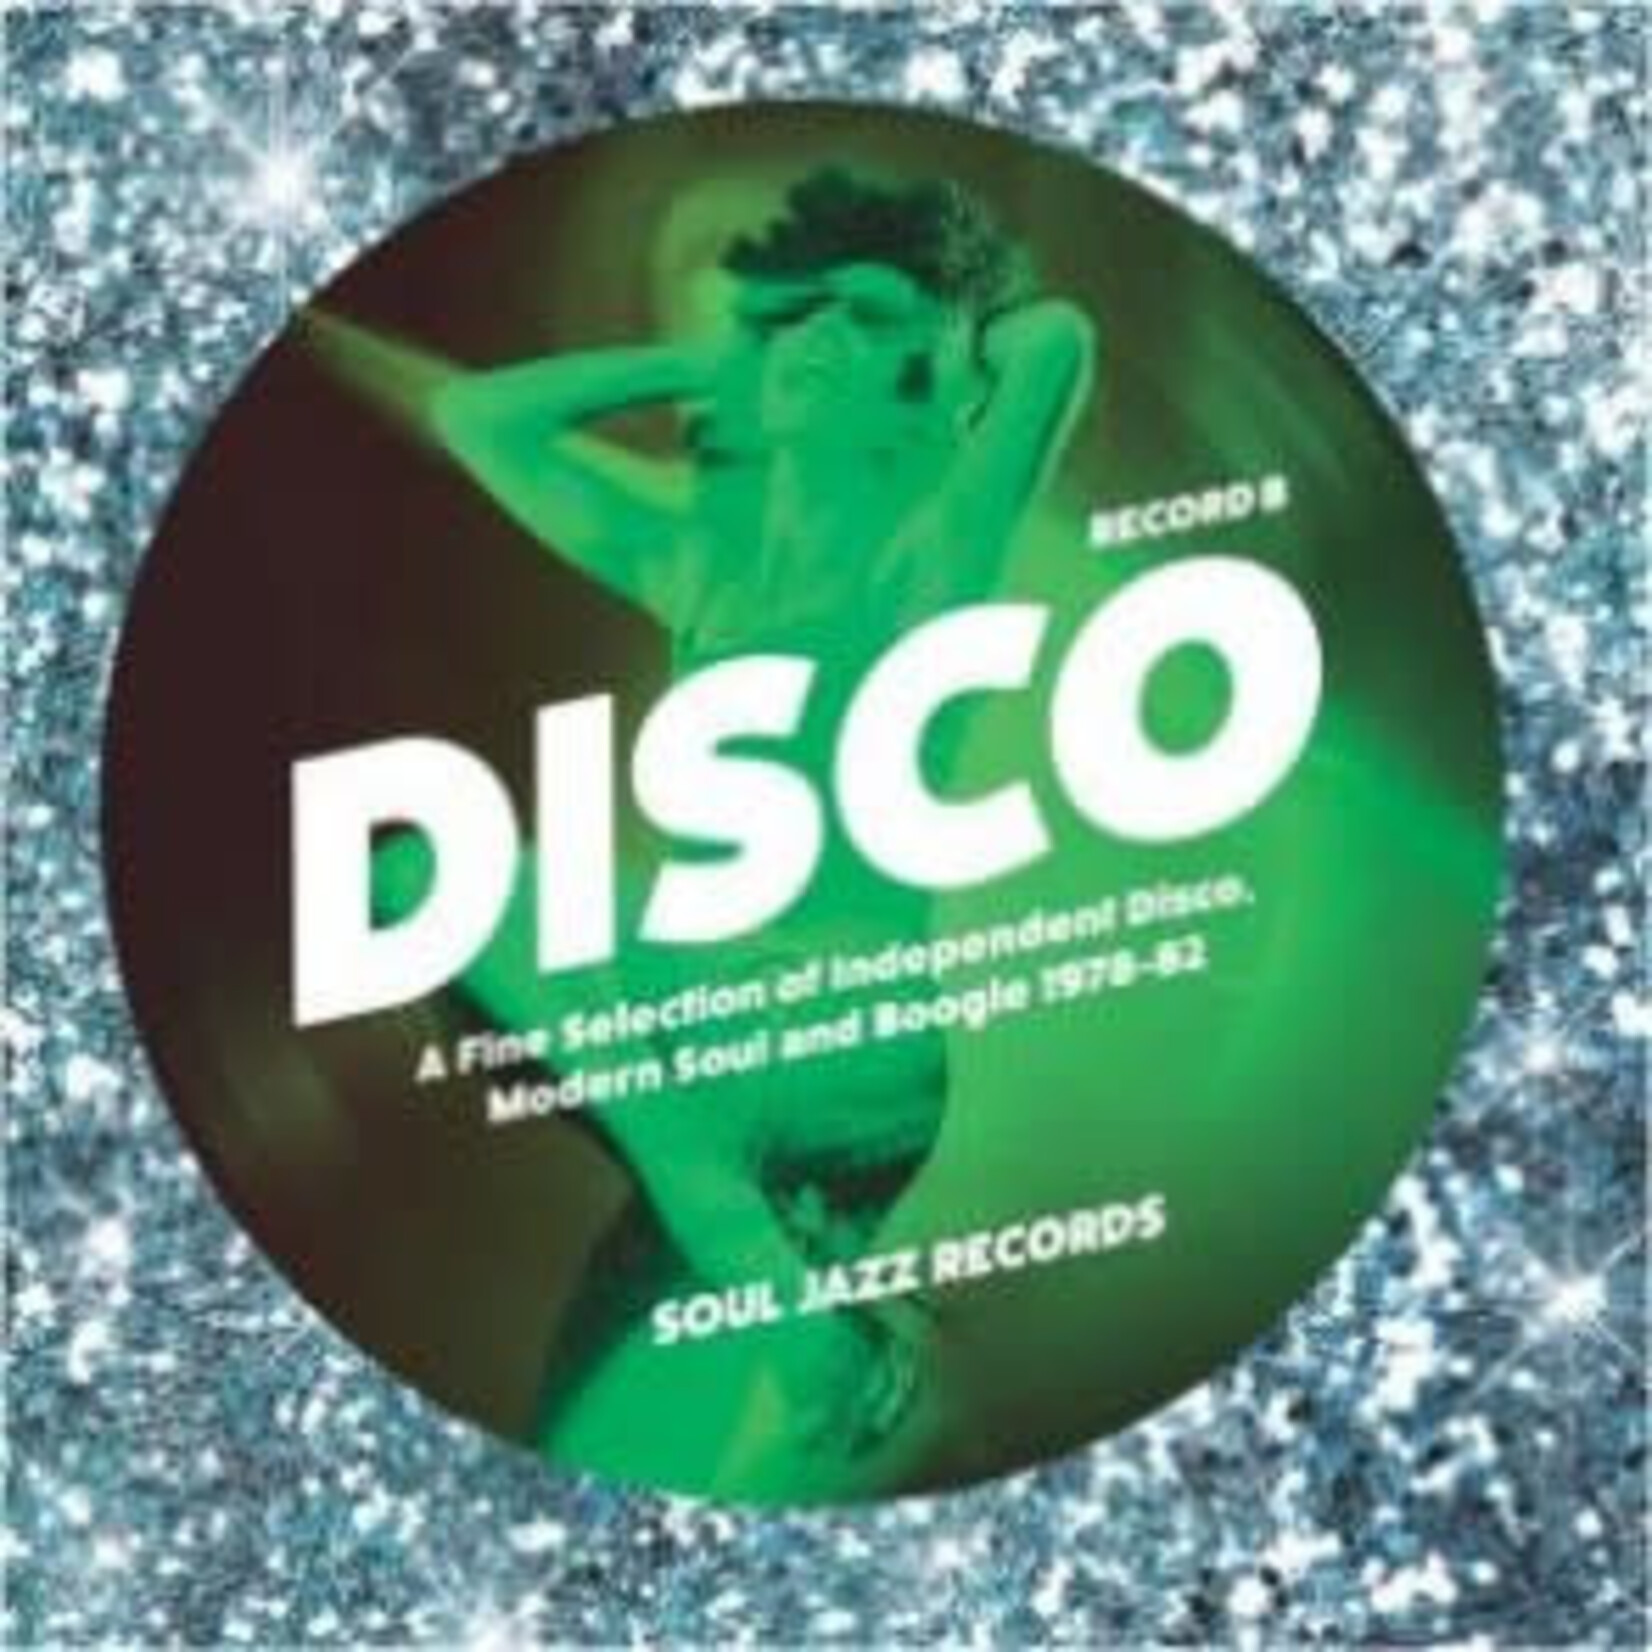 V/A – Disco (A Fine Selection Of Independent Disco, Modern Soul & Boogie 1978-82) (Record B)